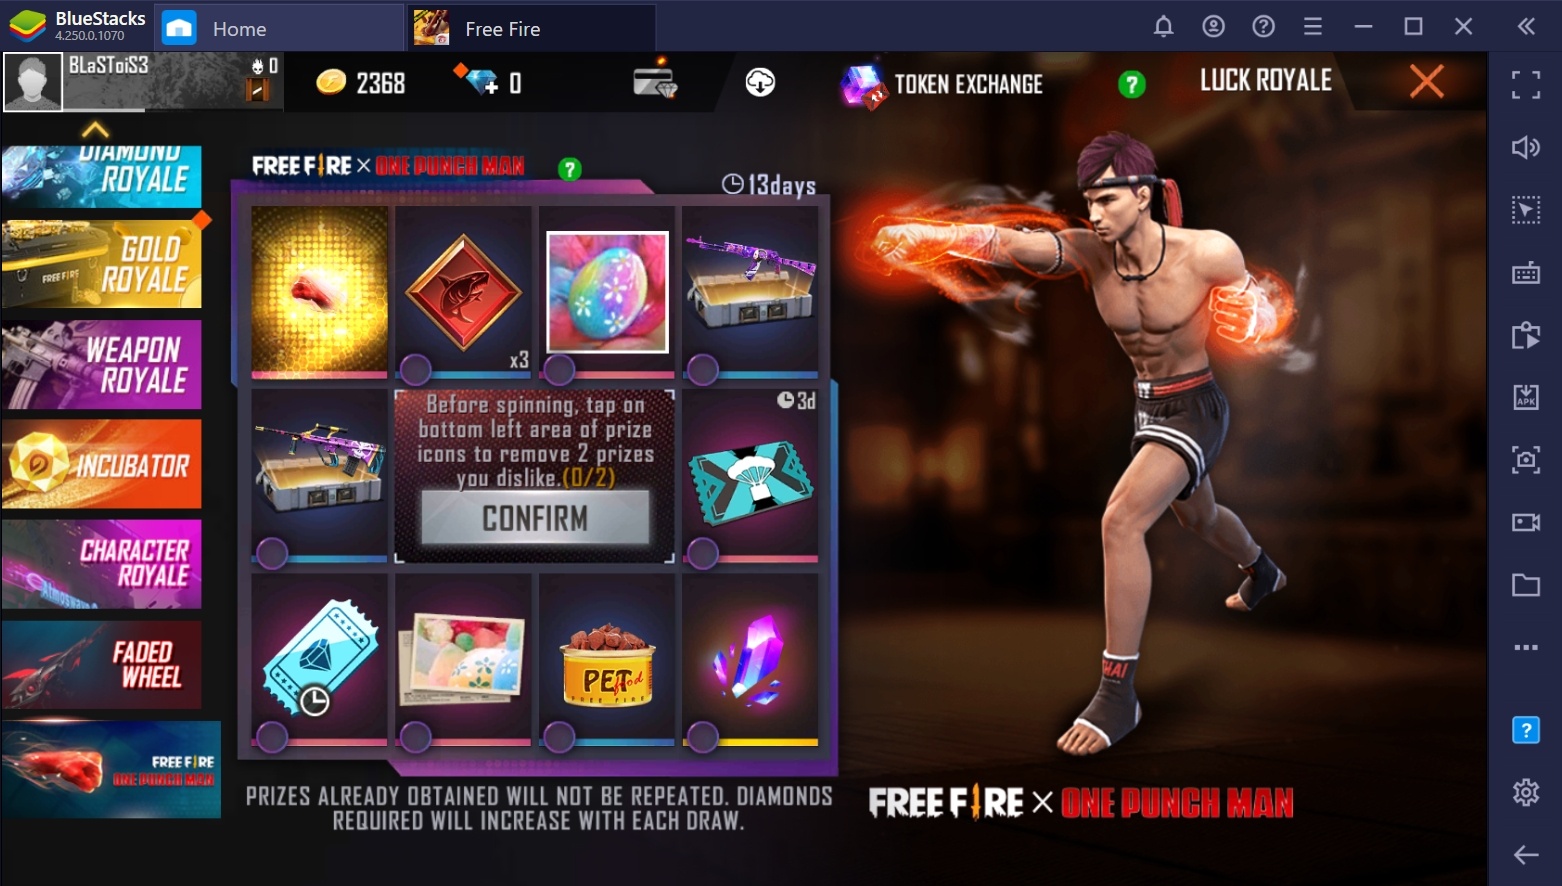 Garena Free Fire – One Punch Man Event Now Available In-Game